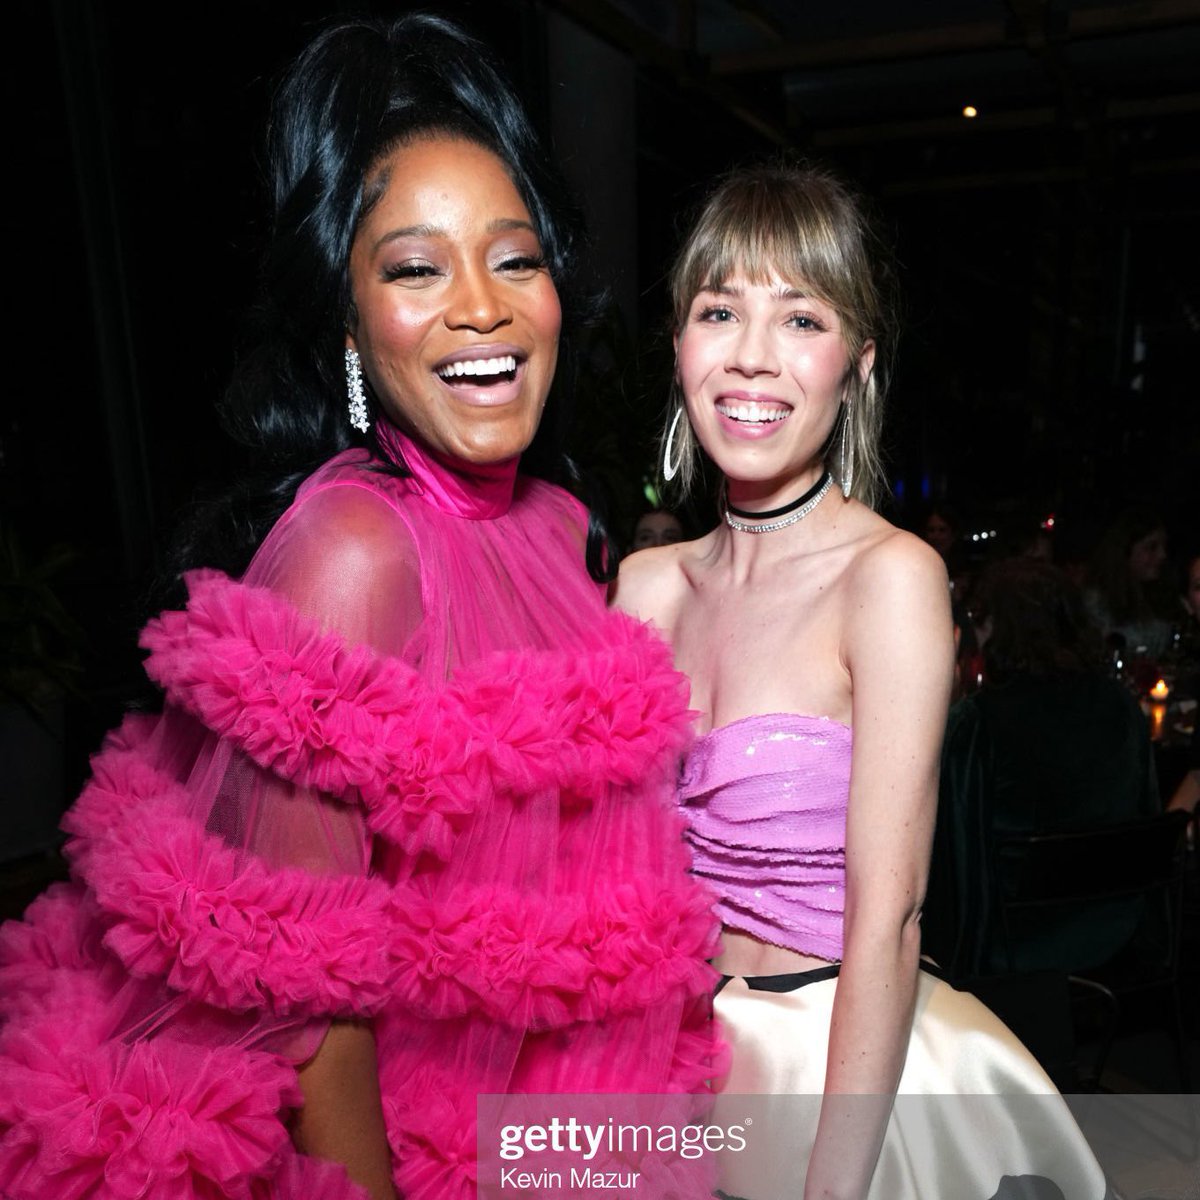 #NewProfilePic 
#IStandWithKekePalmer 
#IStandWithKeke
#IStandWithSurvivors
#SurvivorCommunity
#KekePalmer
#JennetteMcCurdy
Grew up admiring these two resilient, beautiful souls, and I continue to do so, more & more 💞